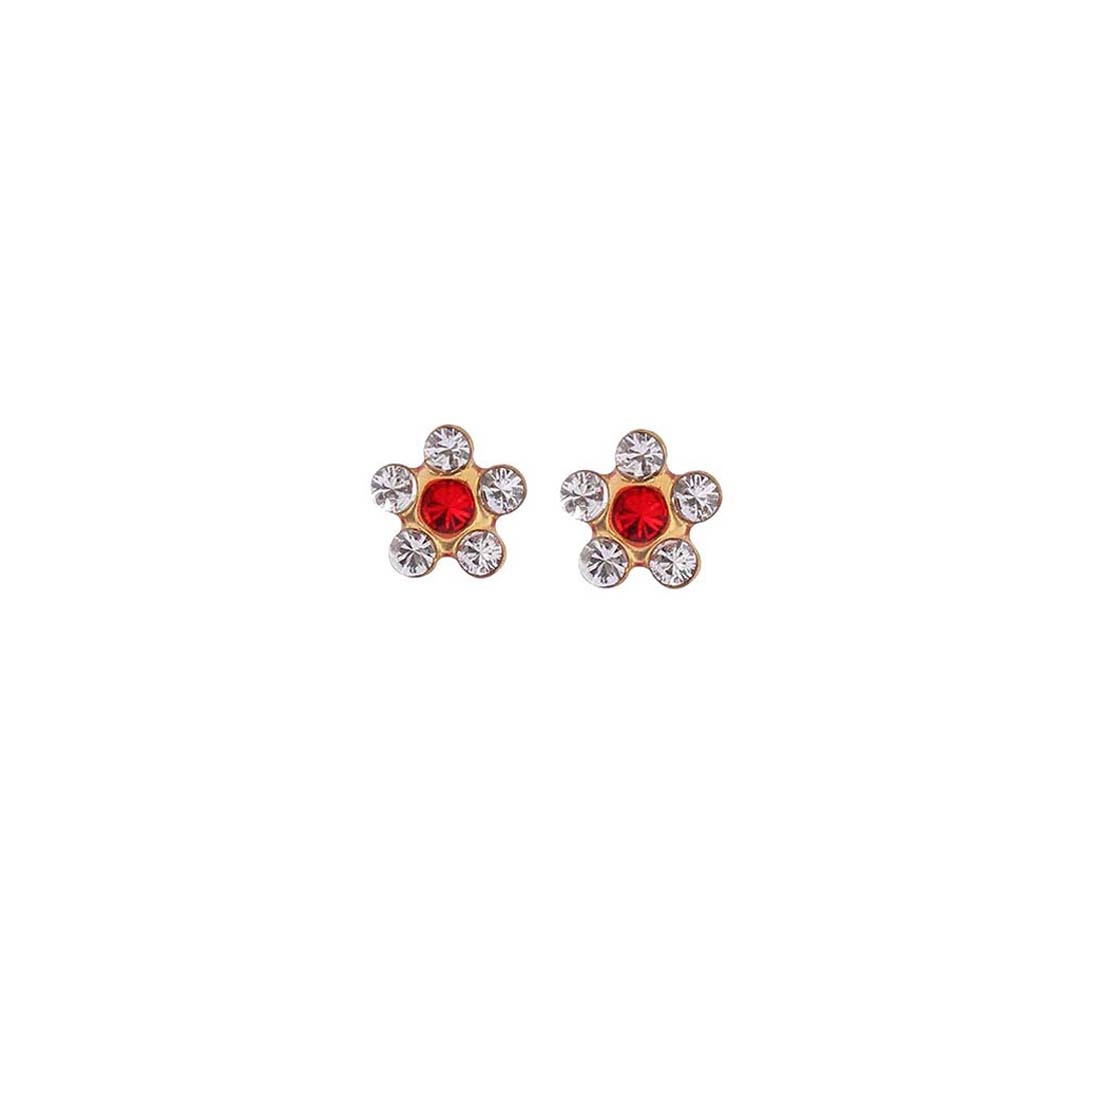 Daisy (Flower) - Red | 24K Gold Plated Kids / Baby / Children’s Fashion Earrings | Studex Tiny Tips